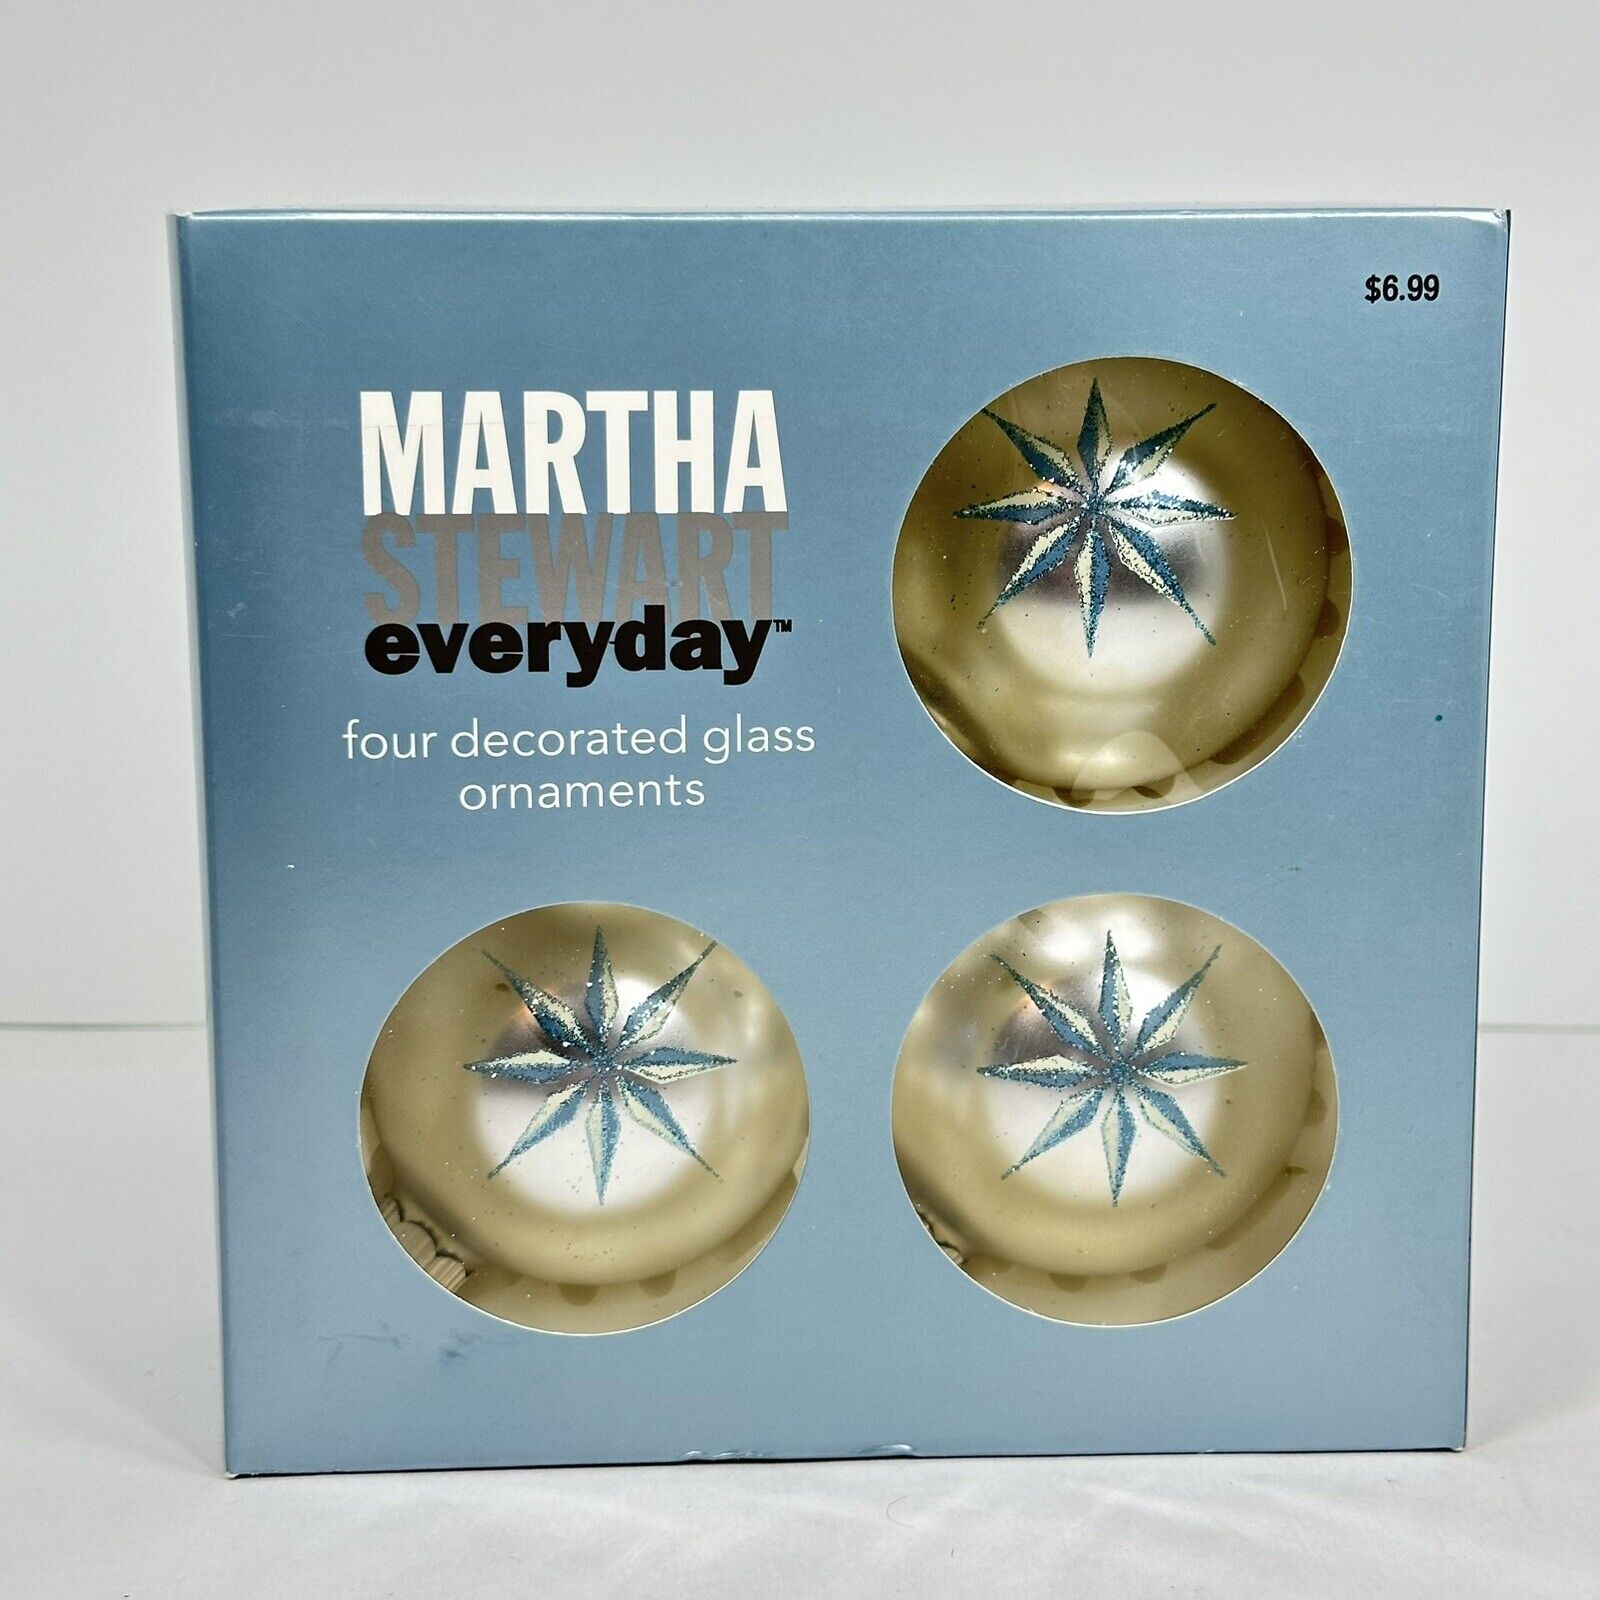 Martha Stewart Everyday Decorated Glass Christmas Ornaments Set of 4